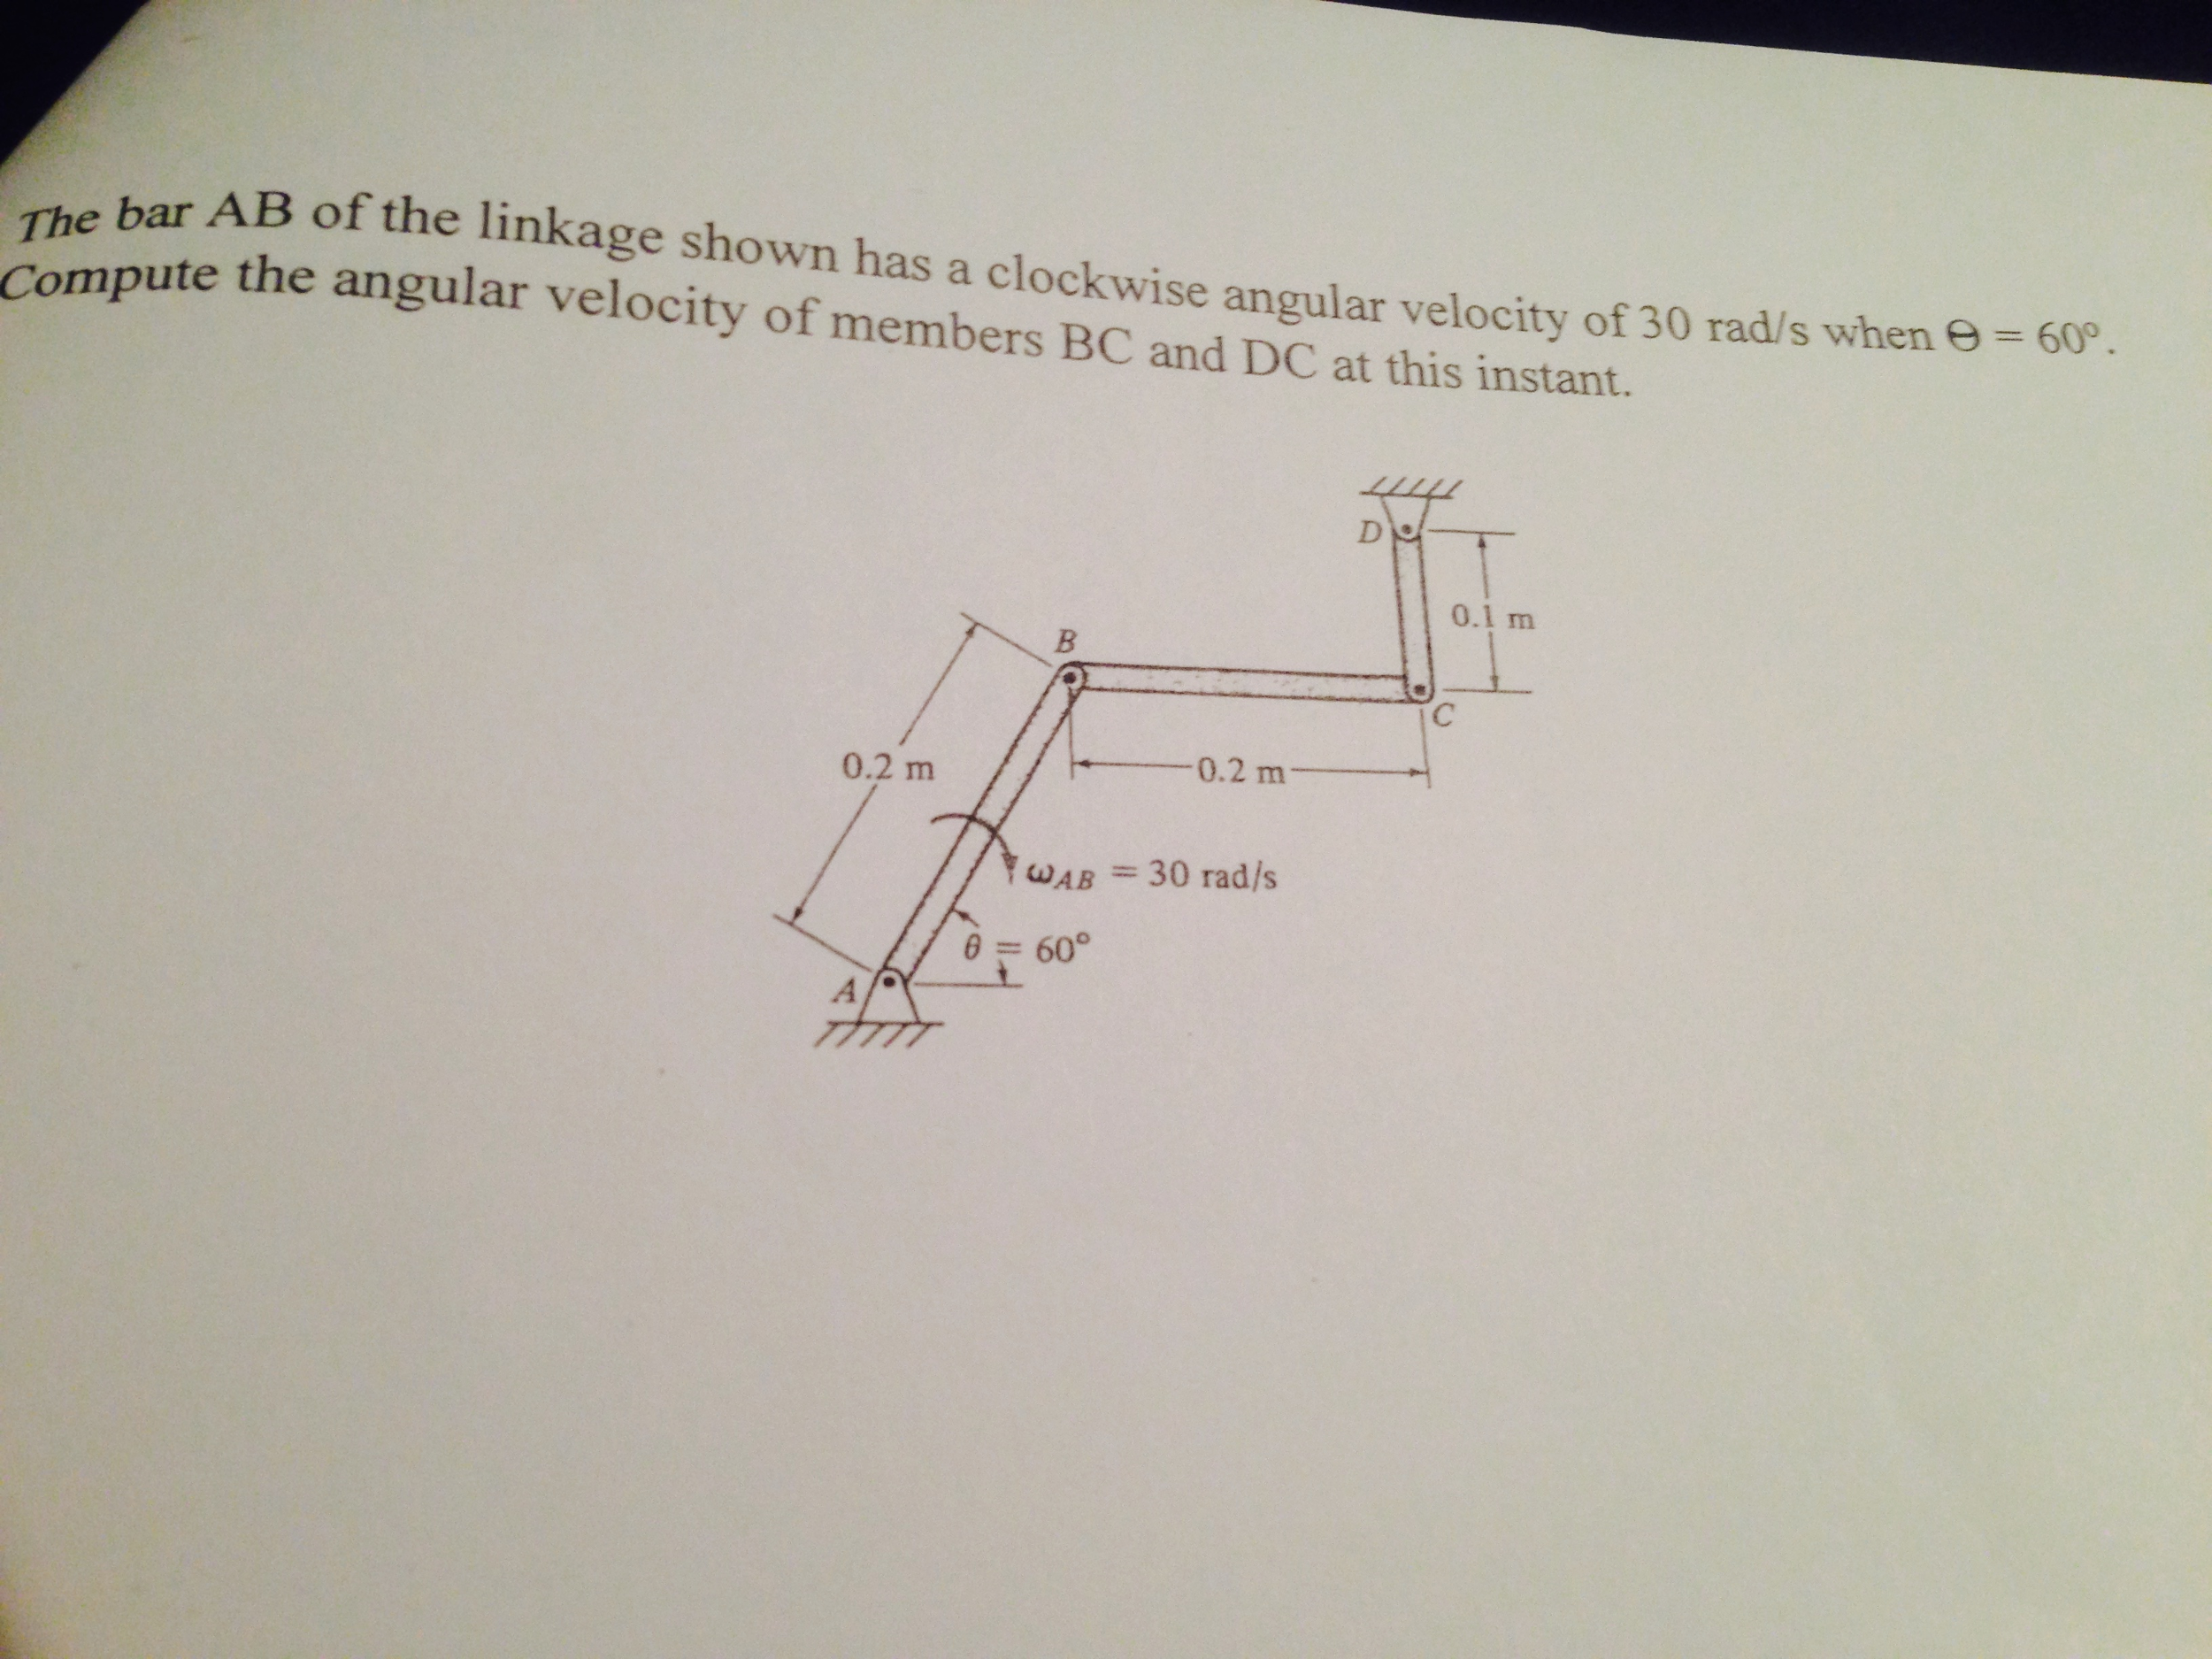 The bar AB of the linkage shown has a clockwise an